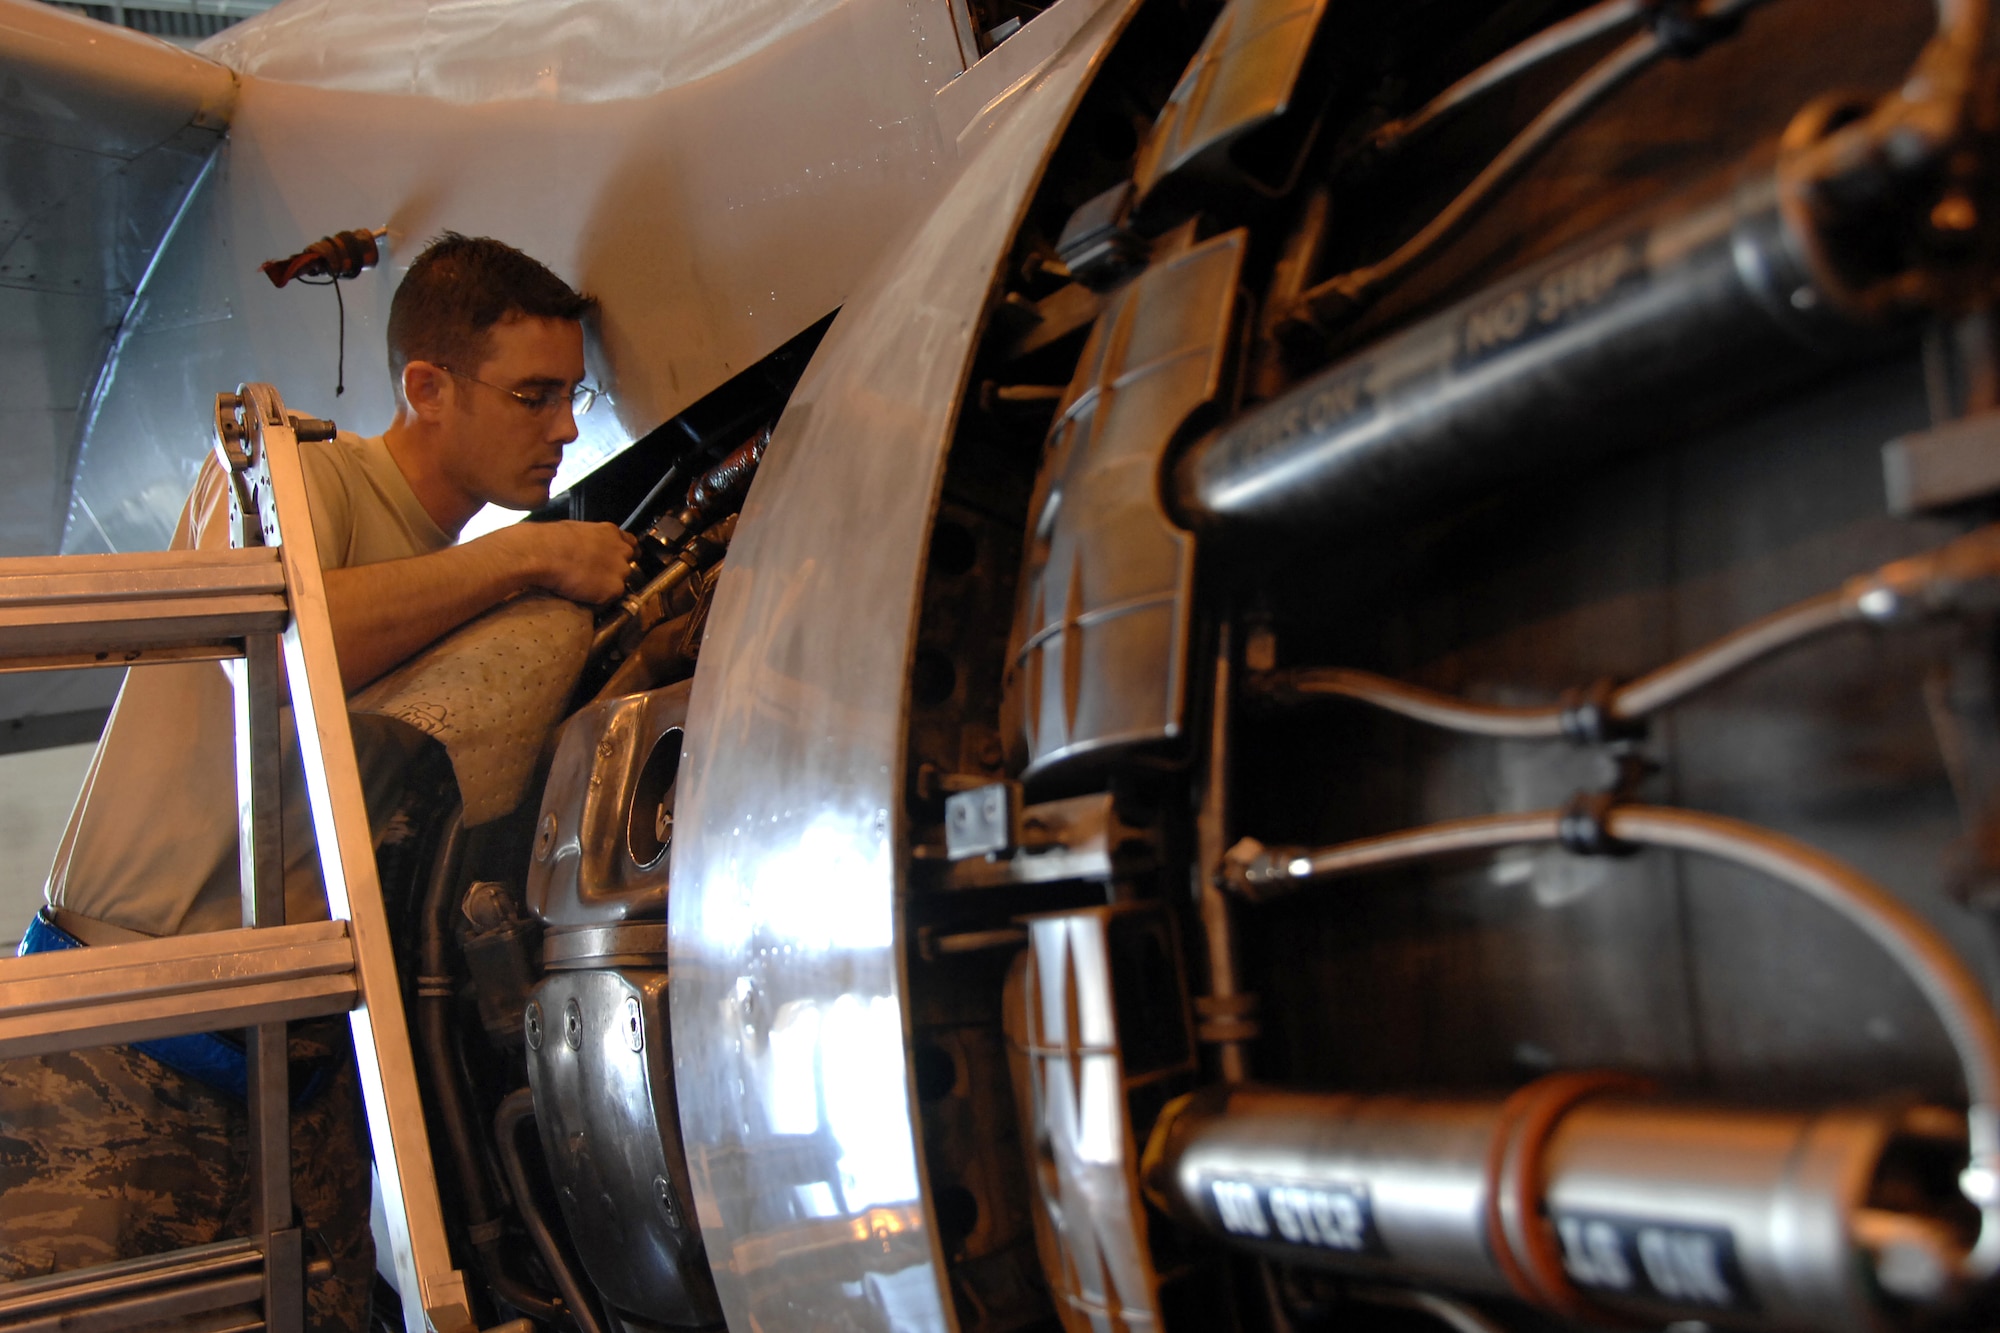 OFFUTT AIR FORCE BASE, Neb. -- Staff Sgt. Jeremy Bates, a hydraulic craftsmen assigned to the 55th Aircraft Maintenance Squadron, changes the hydraulic suction lift self-sealing coupling on the OC-135 Open Skies aircraft here, Oct. 1. (U.S. Air Force Photo By Josh Plueger)